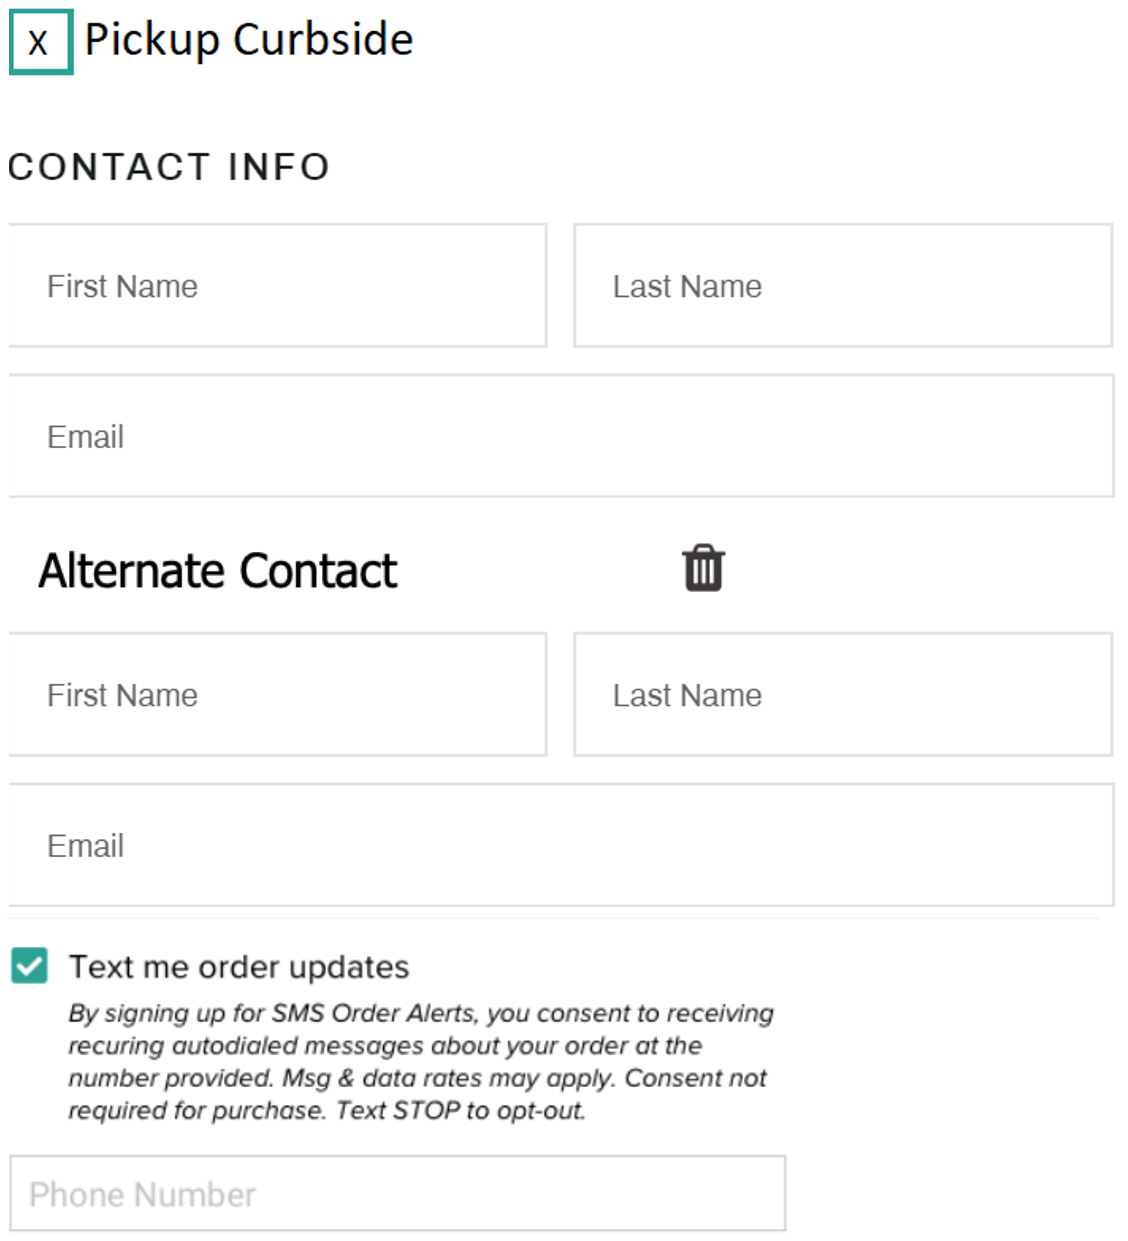 Example of the Curbside widget on the storefront with fields for pickup contact info